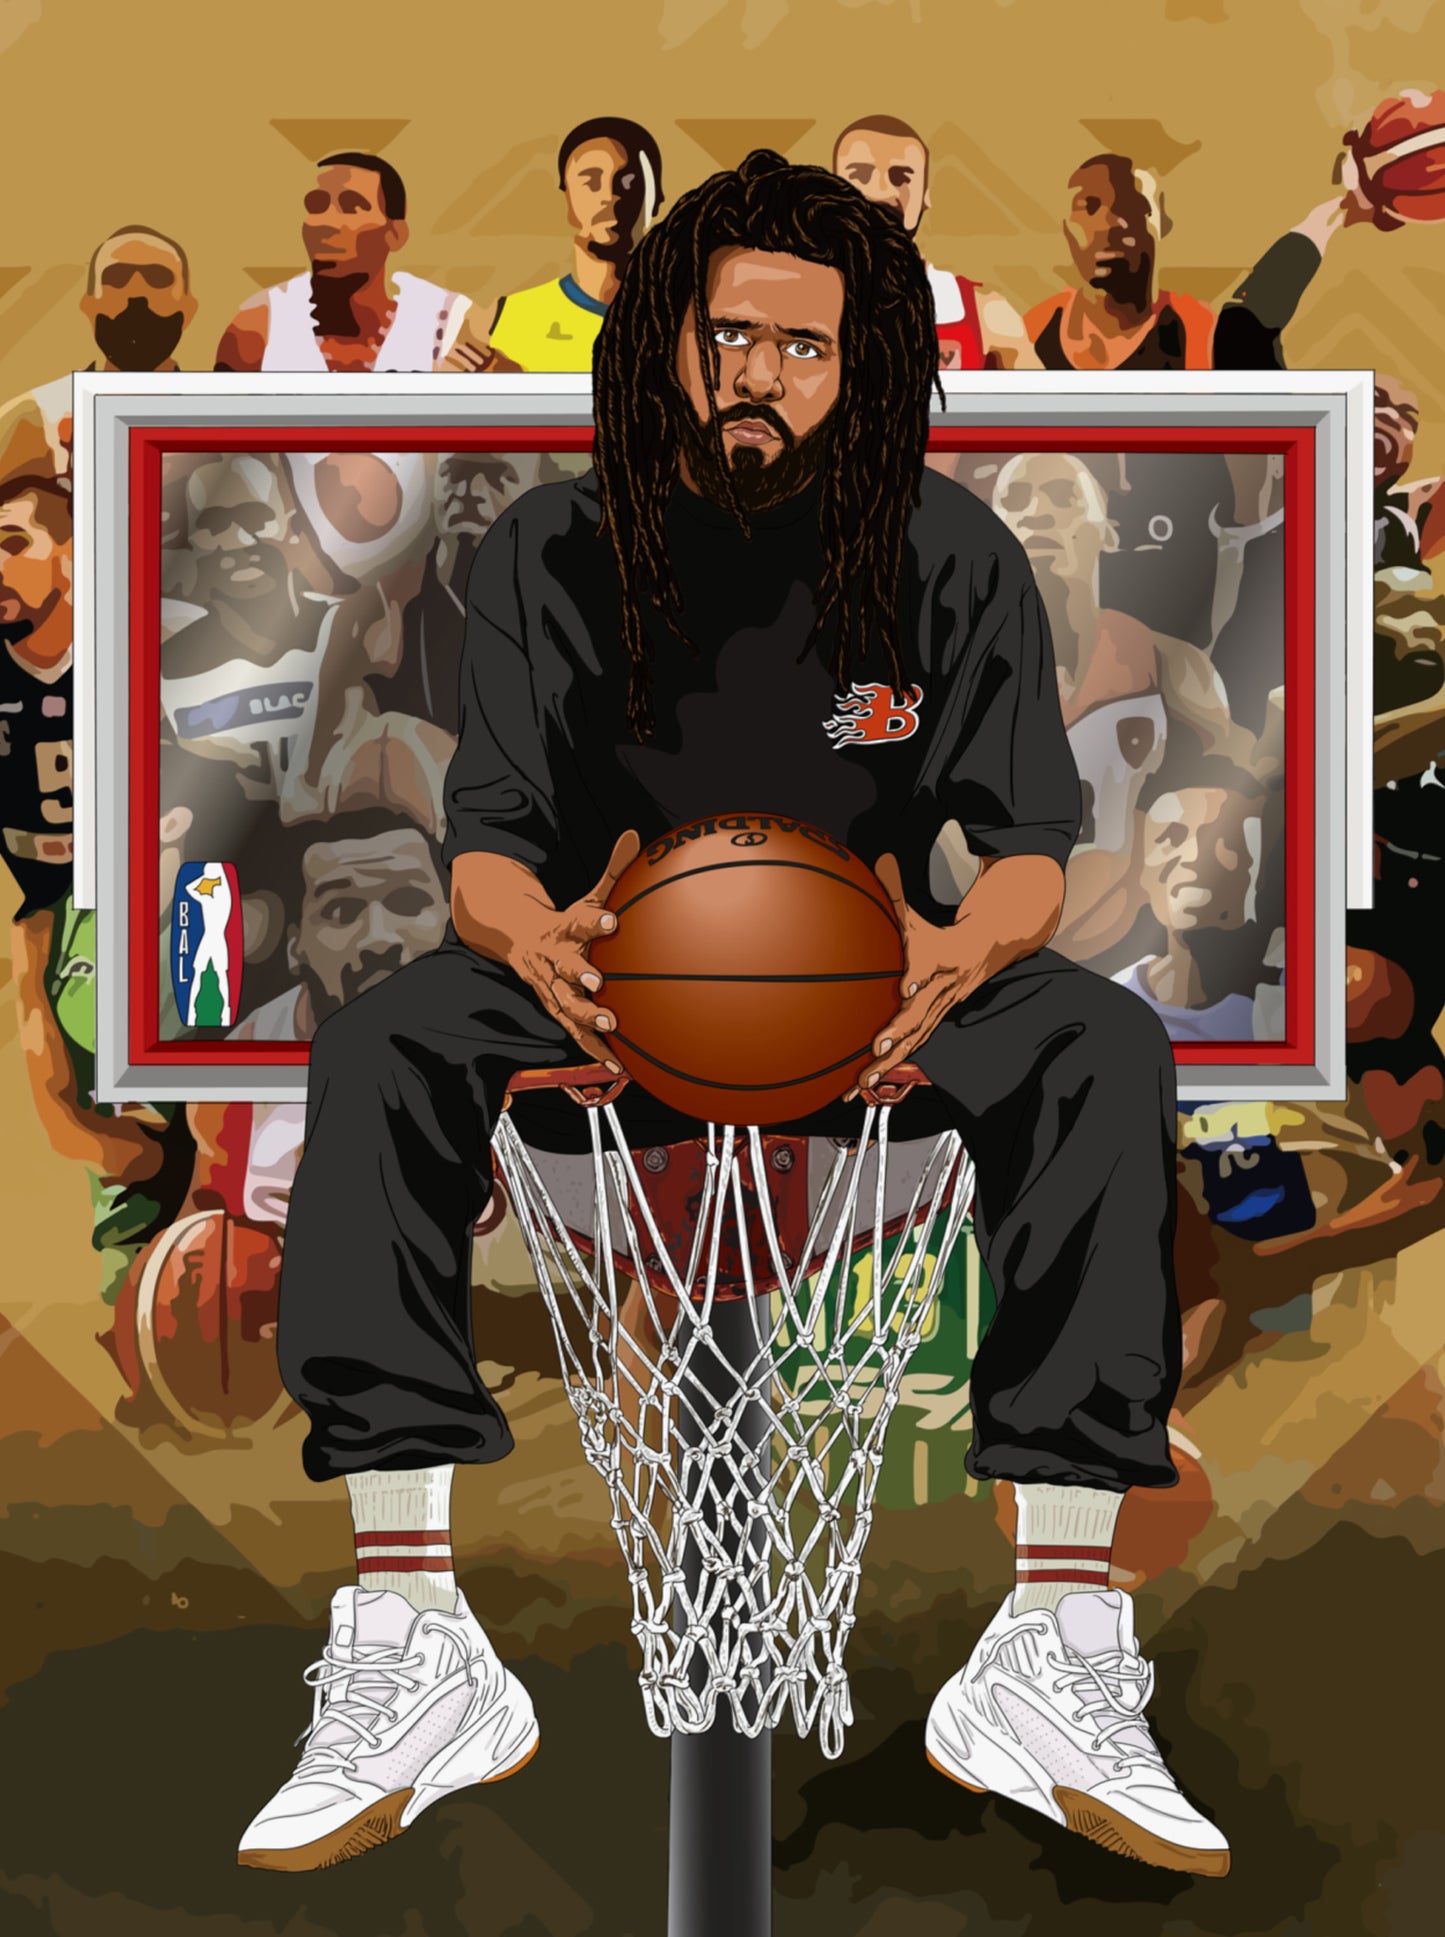 J. Cole Poster - The Off-Season